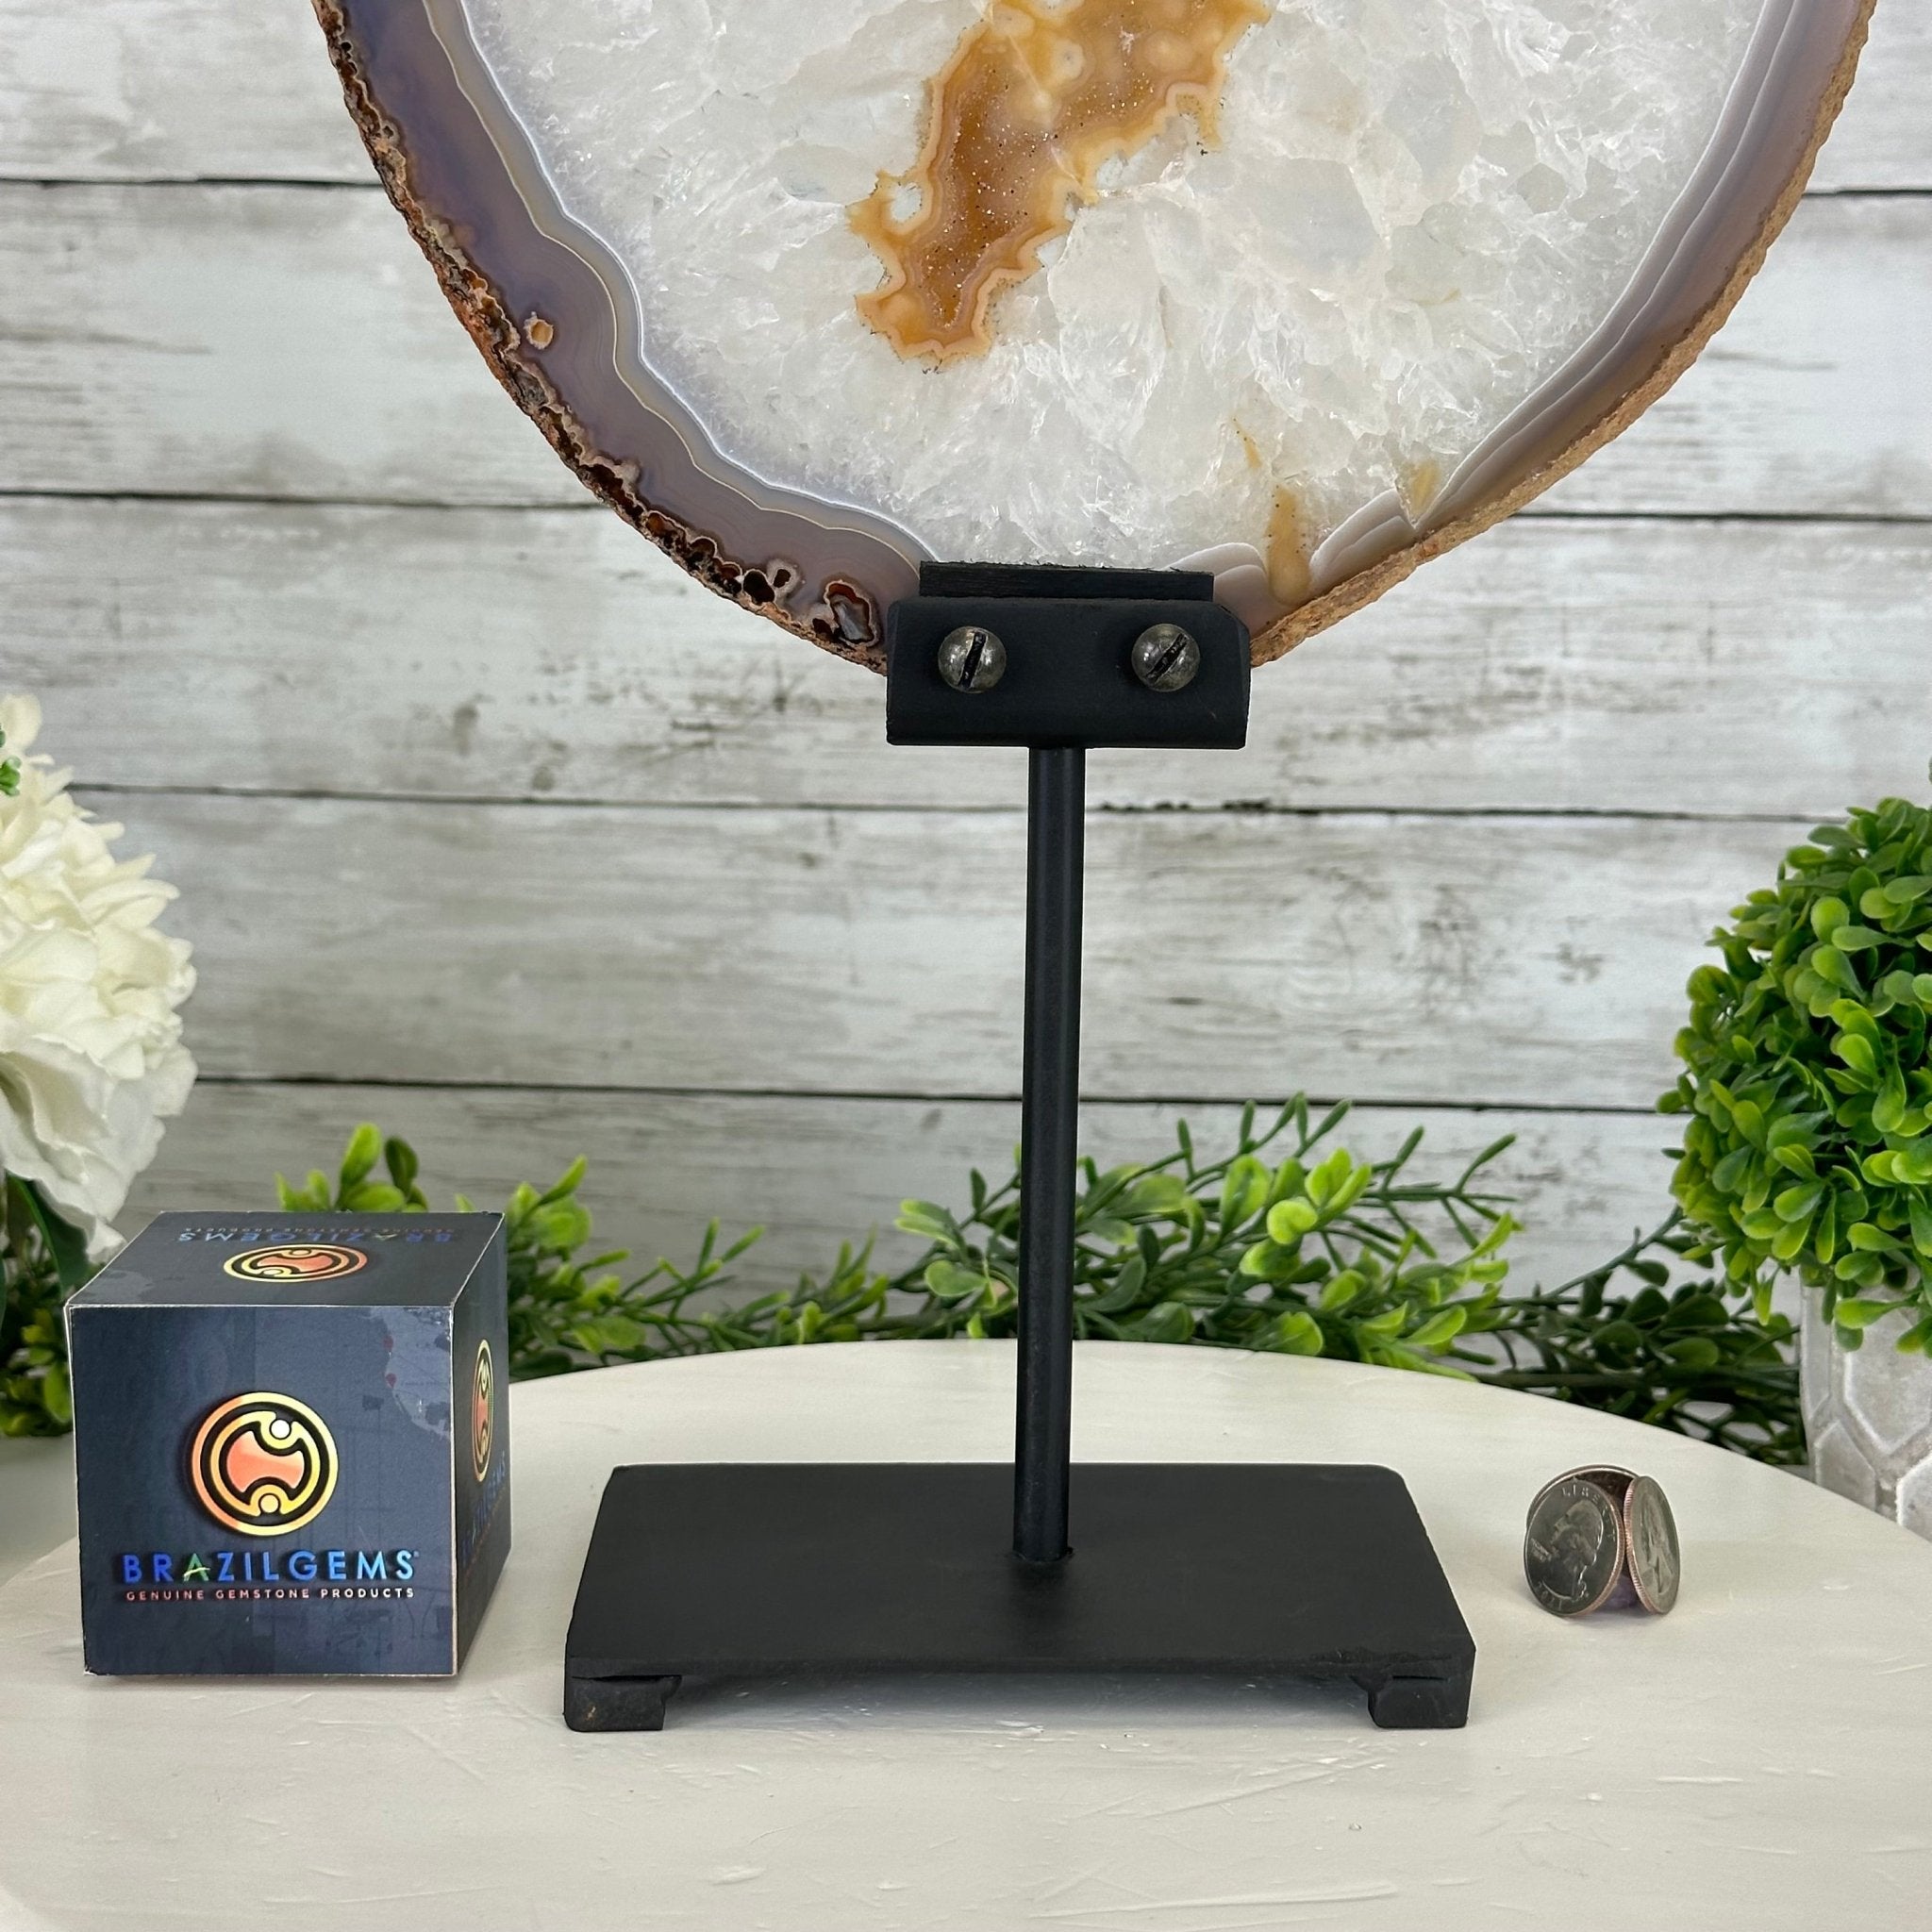 Special Large Natural Brazilian Agate Slice on a Metal Stand, 19" Tall #5056-0035 - Brazil GemsBrazil GemsSpecial Large Natural Brazilian Agate Slice on a Metal Stand, 19" Tall #5056-0035Slices on Fixed Bases5056-0035